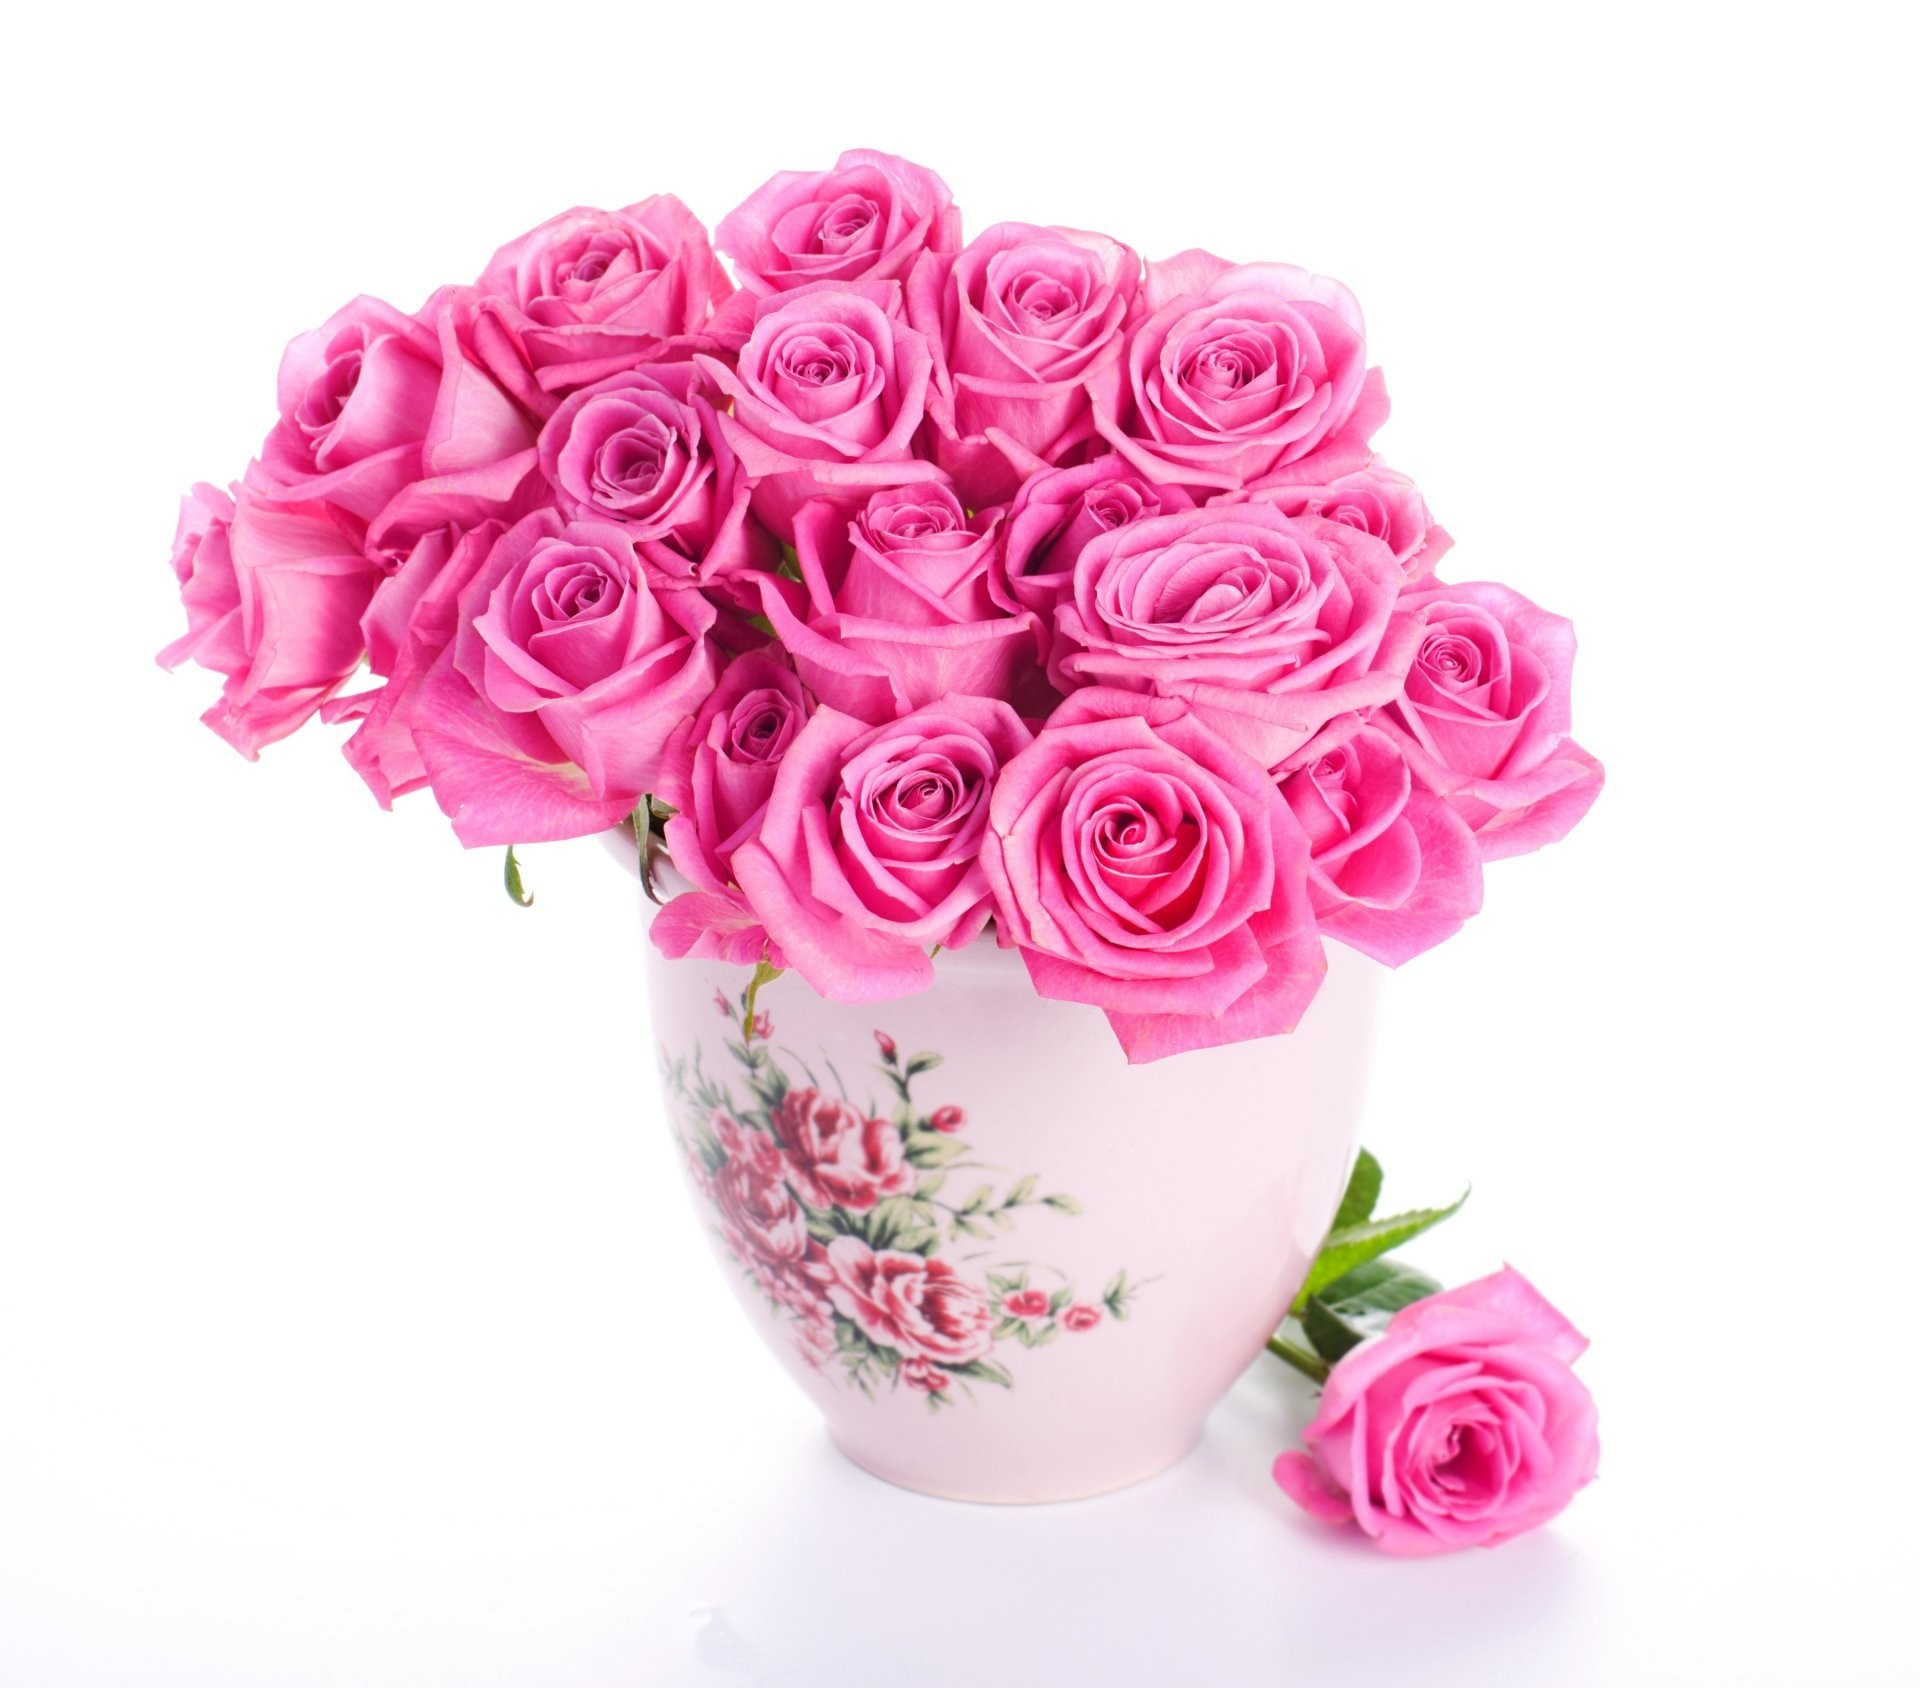 Pink Roses Flowers Beautiful Bouquet Vase Hd Wallpaper - Beautiful Pink Rose Flower Bouquet - HD Wallpaper 